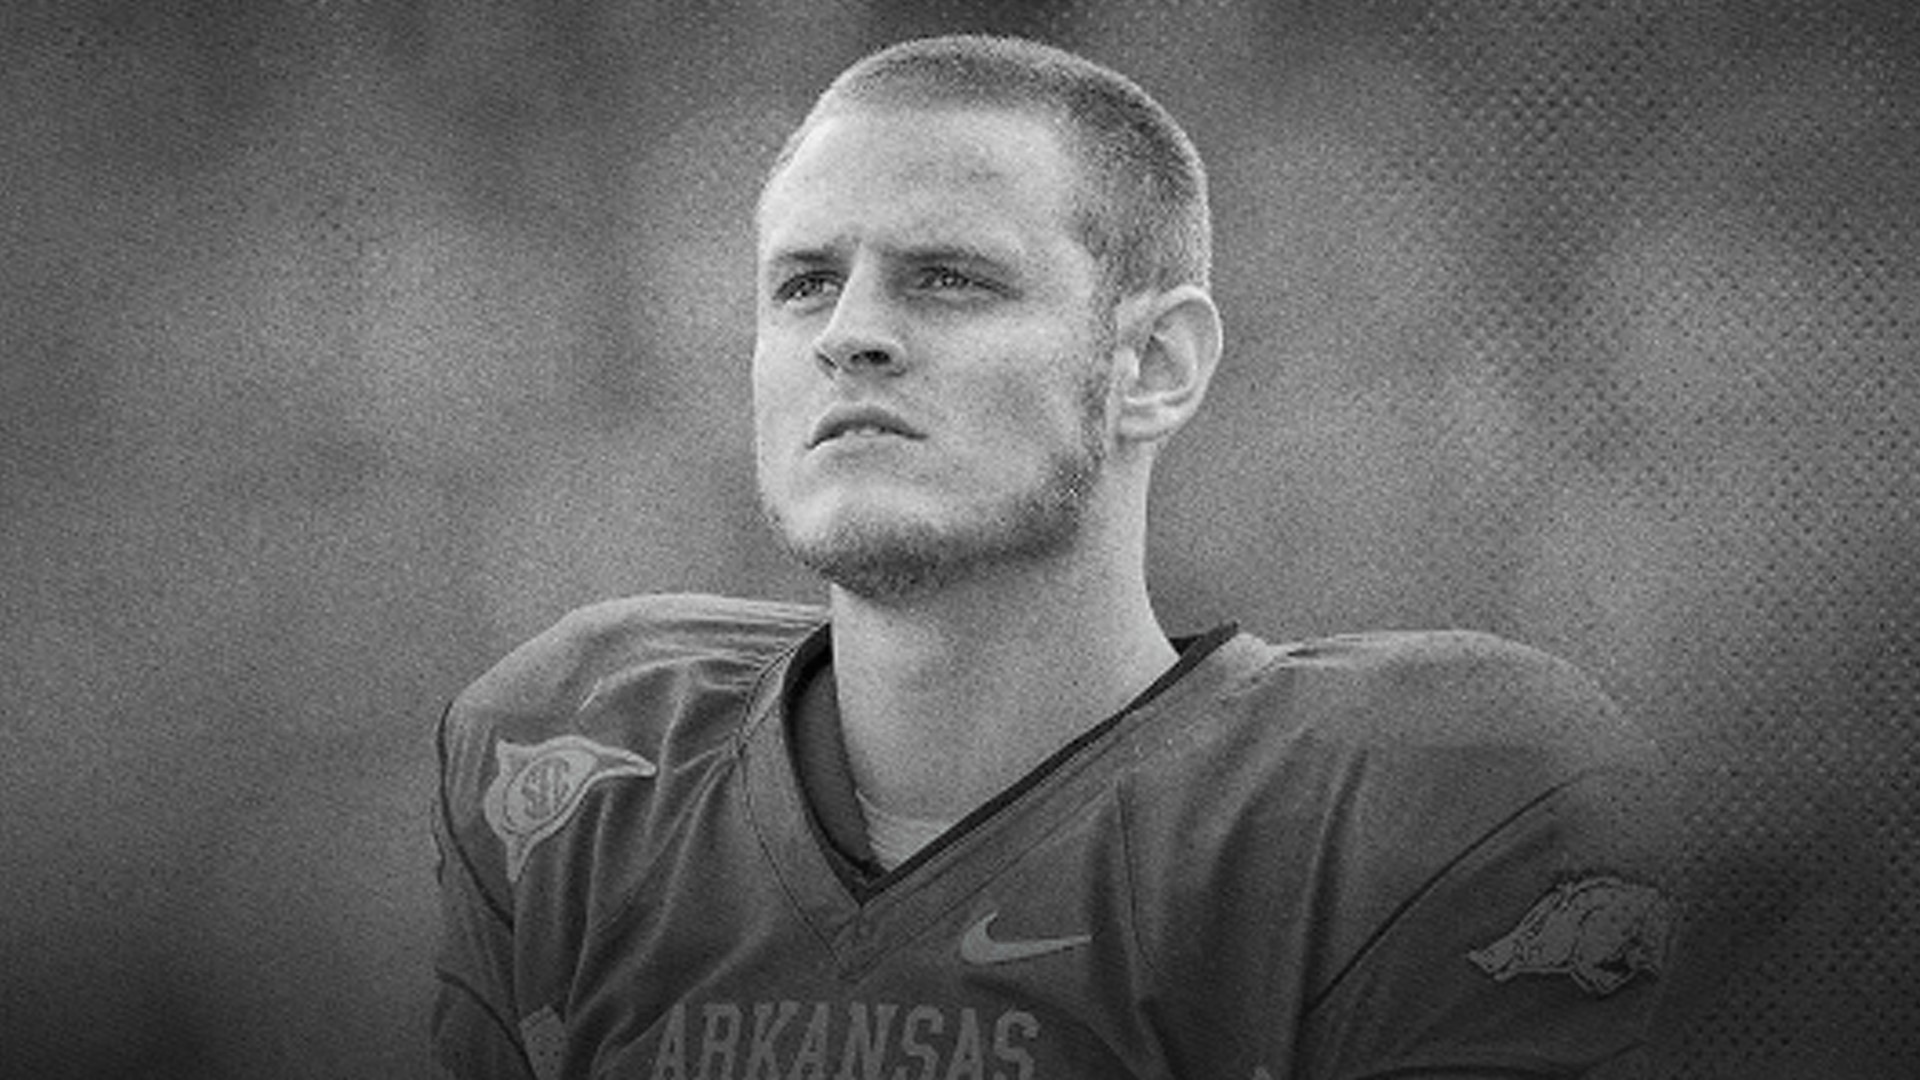 Demarcus Love, Broderick Green, and Casey Dick discuss Ryan Mallett's legacy after his tragic passing.